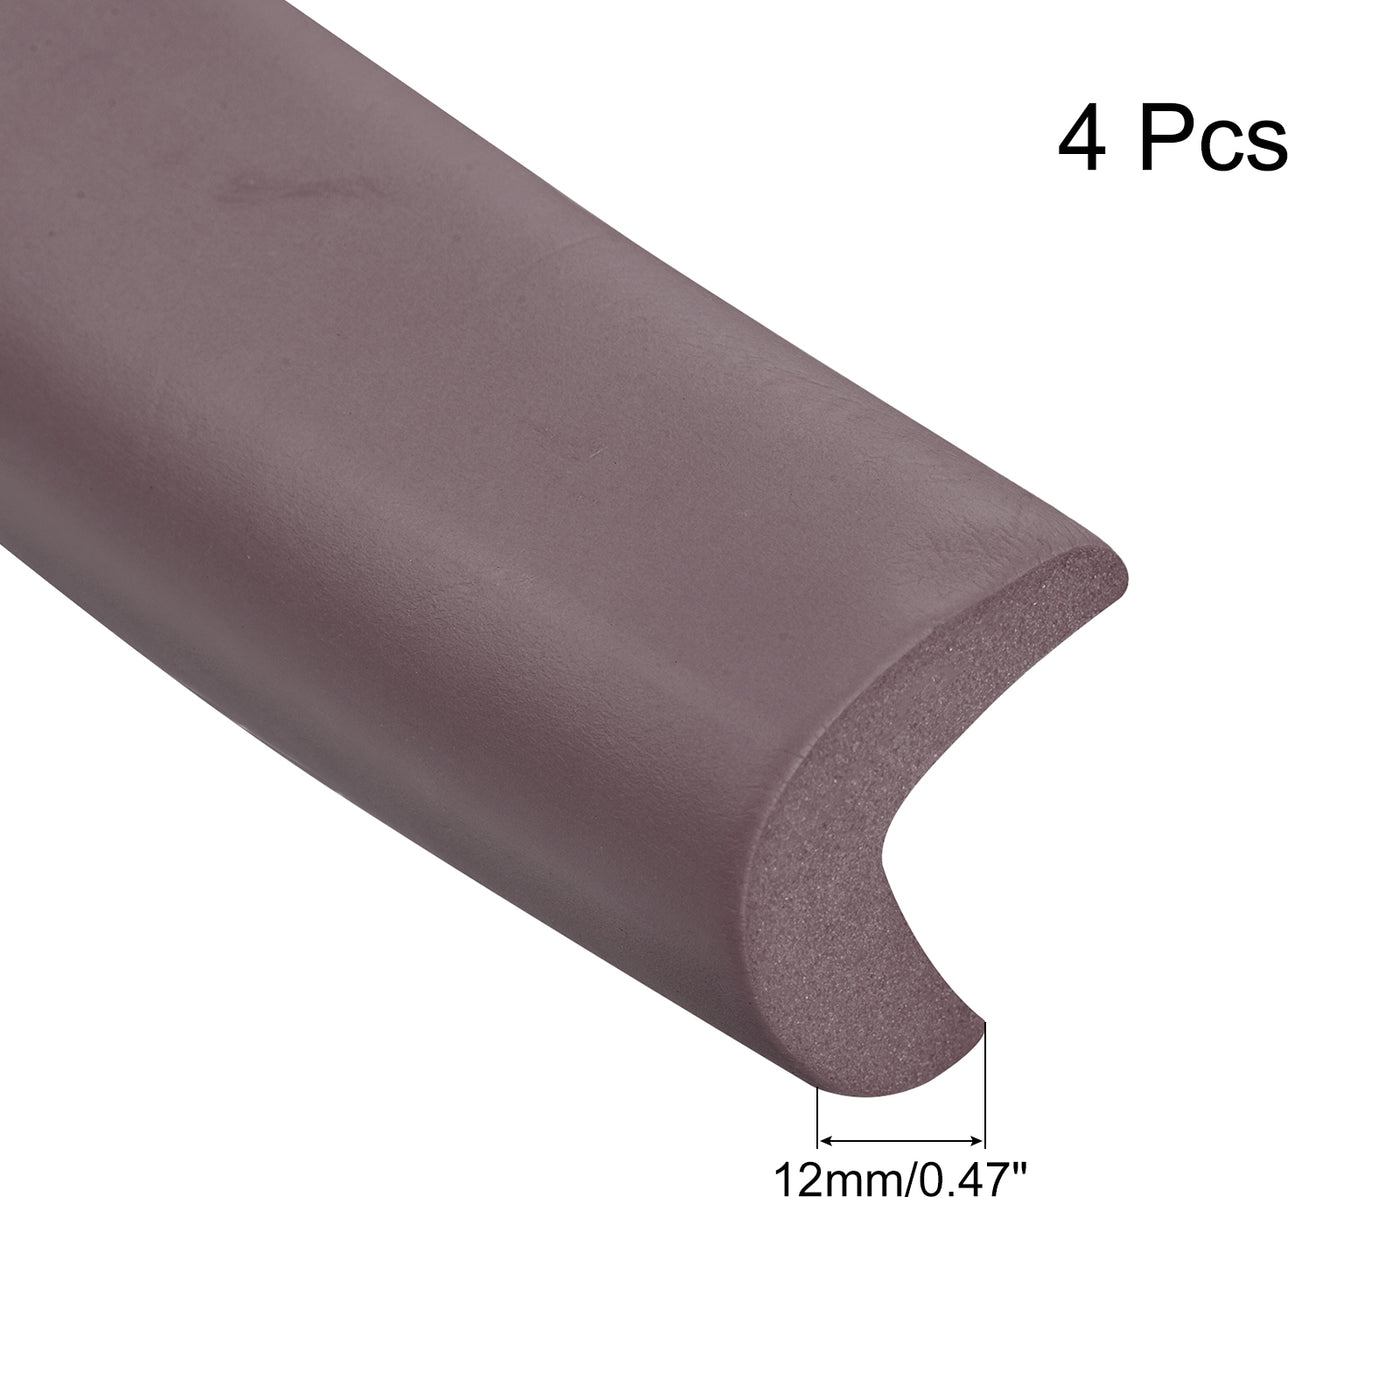 uxcell Uxcell Corner Guards Edge Protectors 6.56ft(2M), 4Pack Foam Safety Bumper Brown